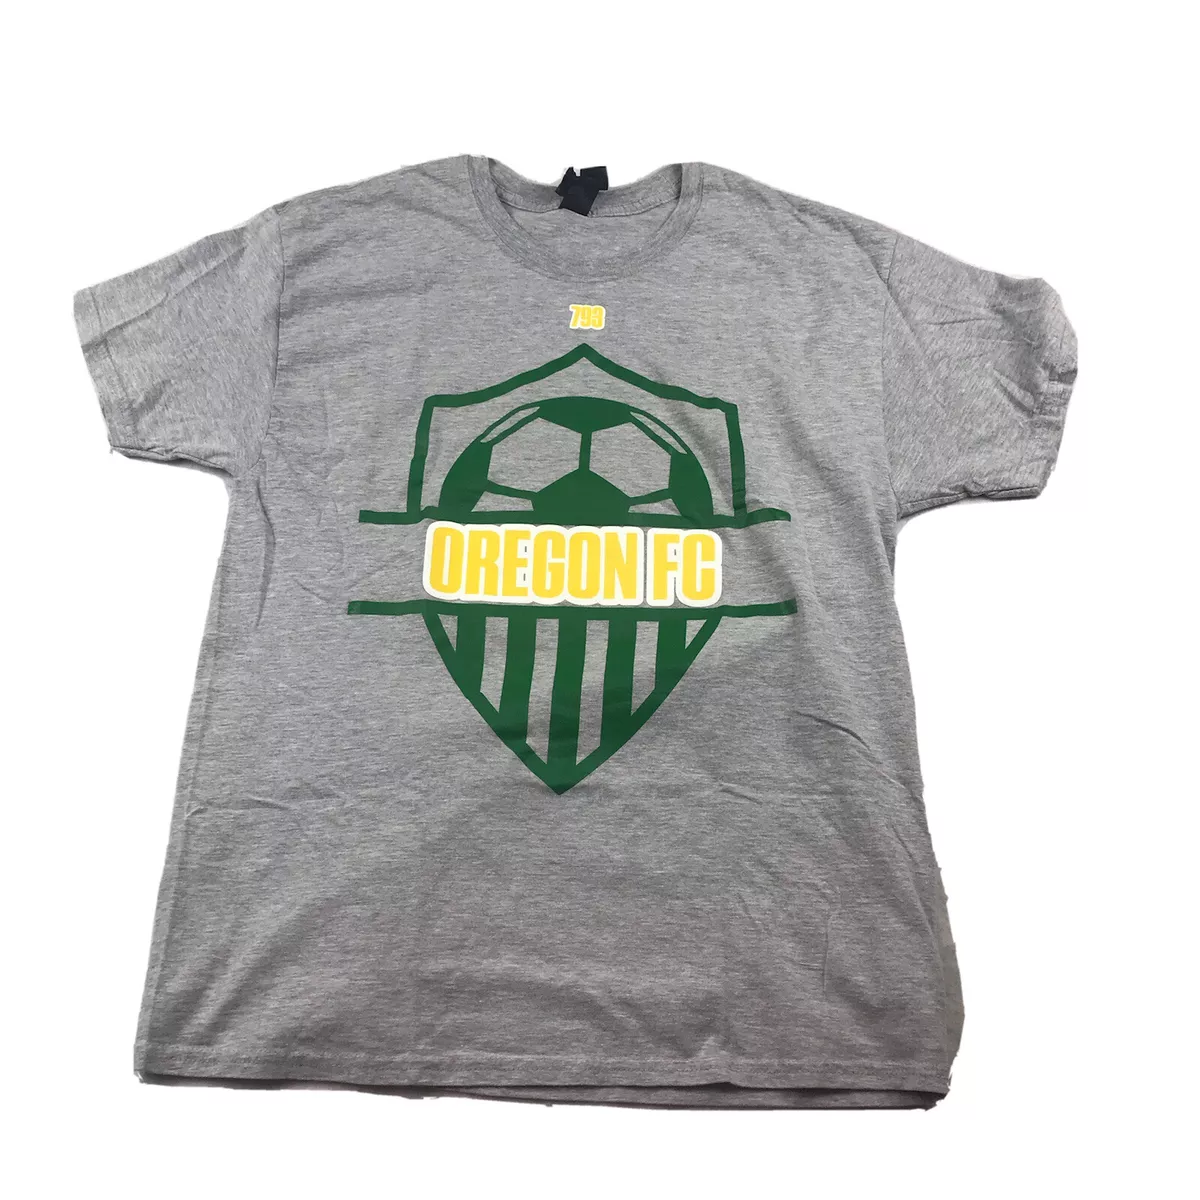 Oregon FC #5 Graphic Tee Shirt Adult Large Gray Double Side